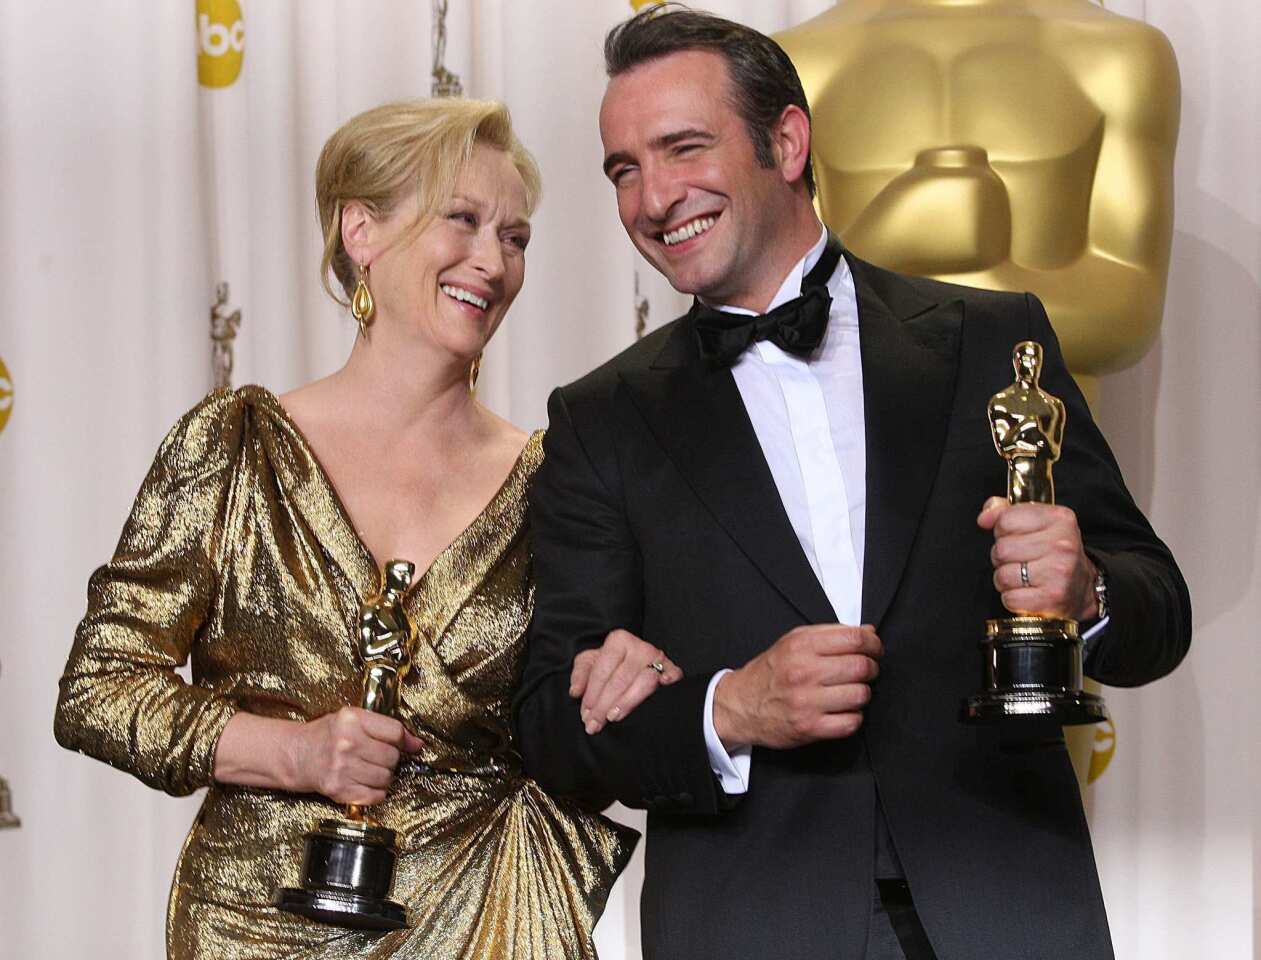 "The Artist" and "Hugo" were the big winners Sunday night at the 84th Academy Awards with five wins each. The top awards of the night went to Jean Dujardin (best actor) and Michel Hazanavicius (best director) for "The Artist," which also won best picture, and Meryl Streep (best actress) for her performance in "Iron Lady." "The Beginners" star Christopher Plummer and "The Help's" Octavia Spencer took home statues for their supporting roles. "Hugo" nabbed several of the technical awards like art direction and cinematography. Related: Photos: Winners Photos: Red carpet Photos: Backstage Photos: Oscars best & worst Photos: Overheard at the Oscars